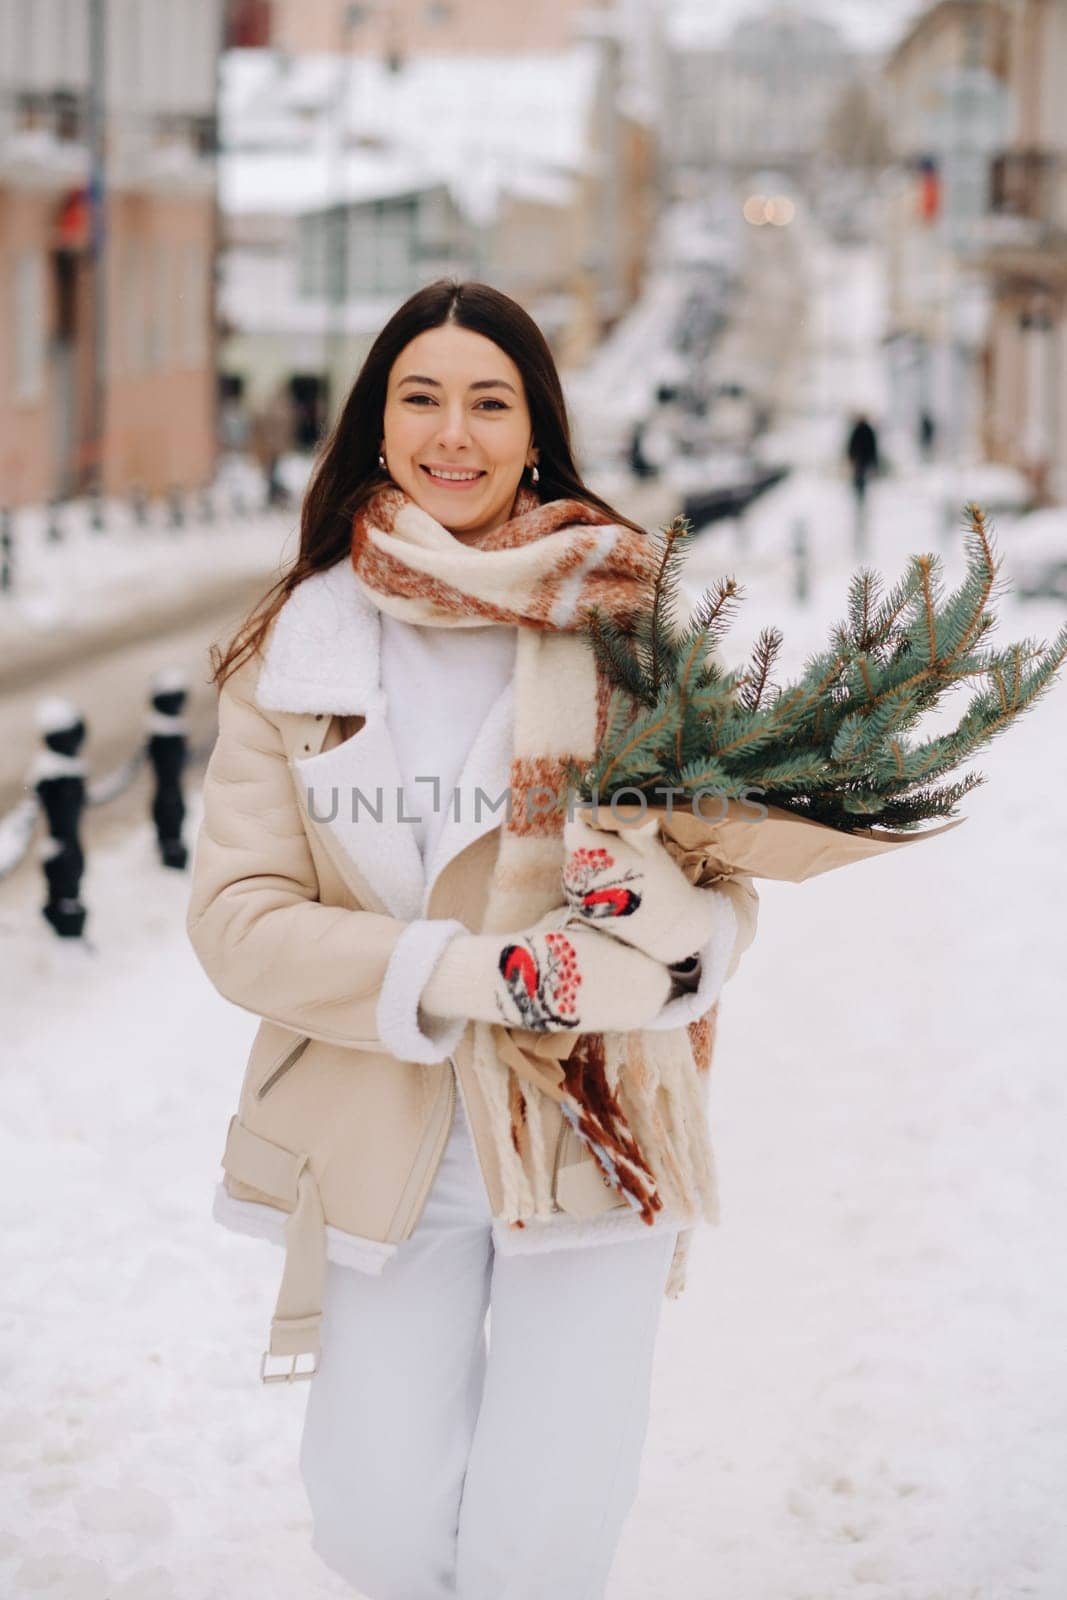 A girl with long hair in winter on the street with a bouquet of fresh fir branches by Lobachad